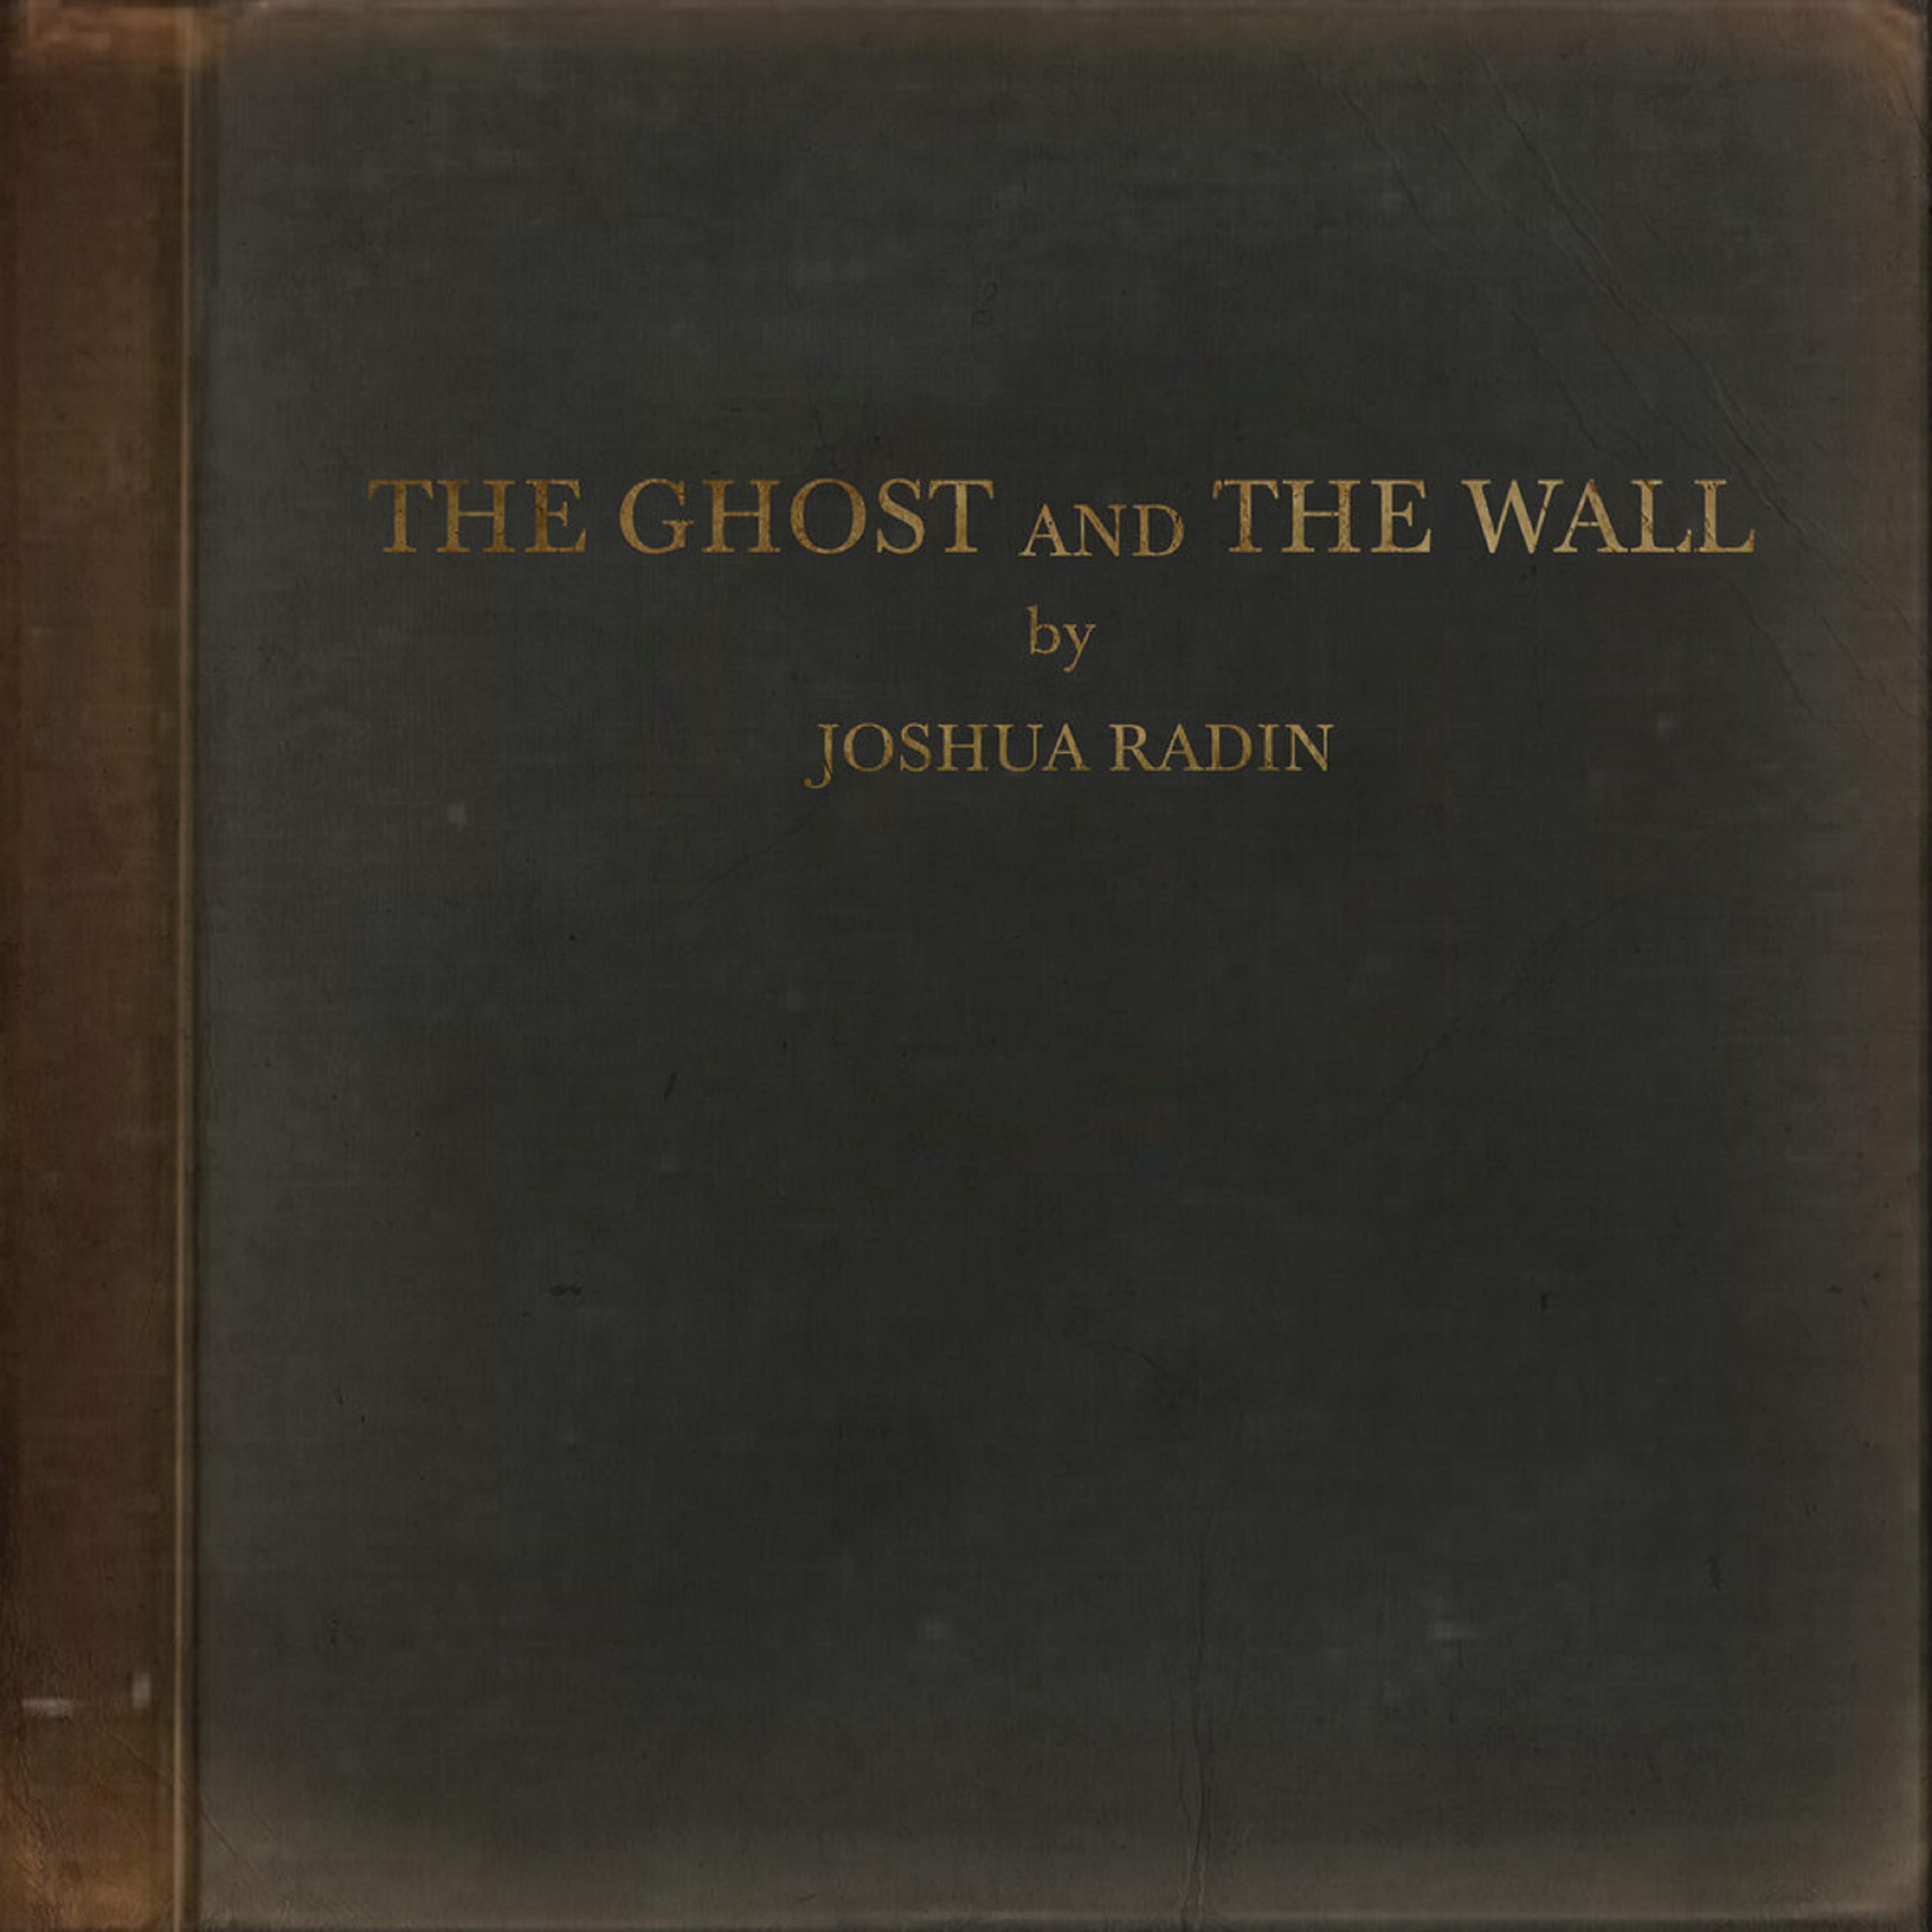 Joshua Radin | ‘The Ghost And The Wall’ | Review